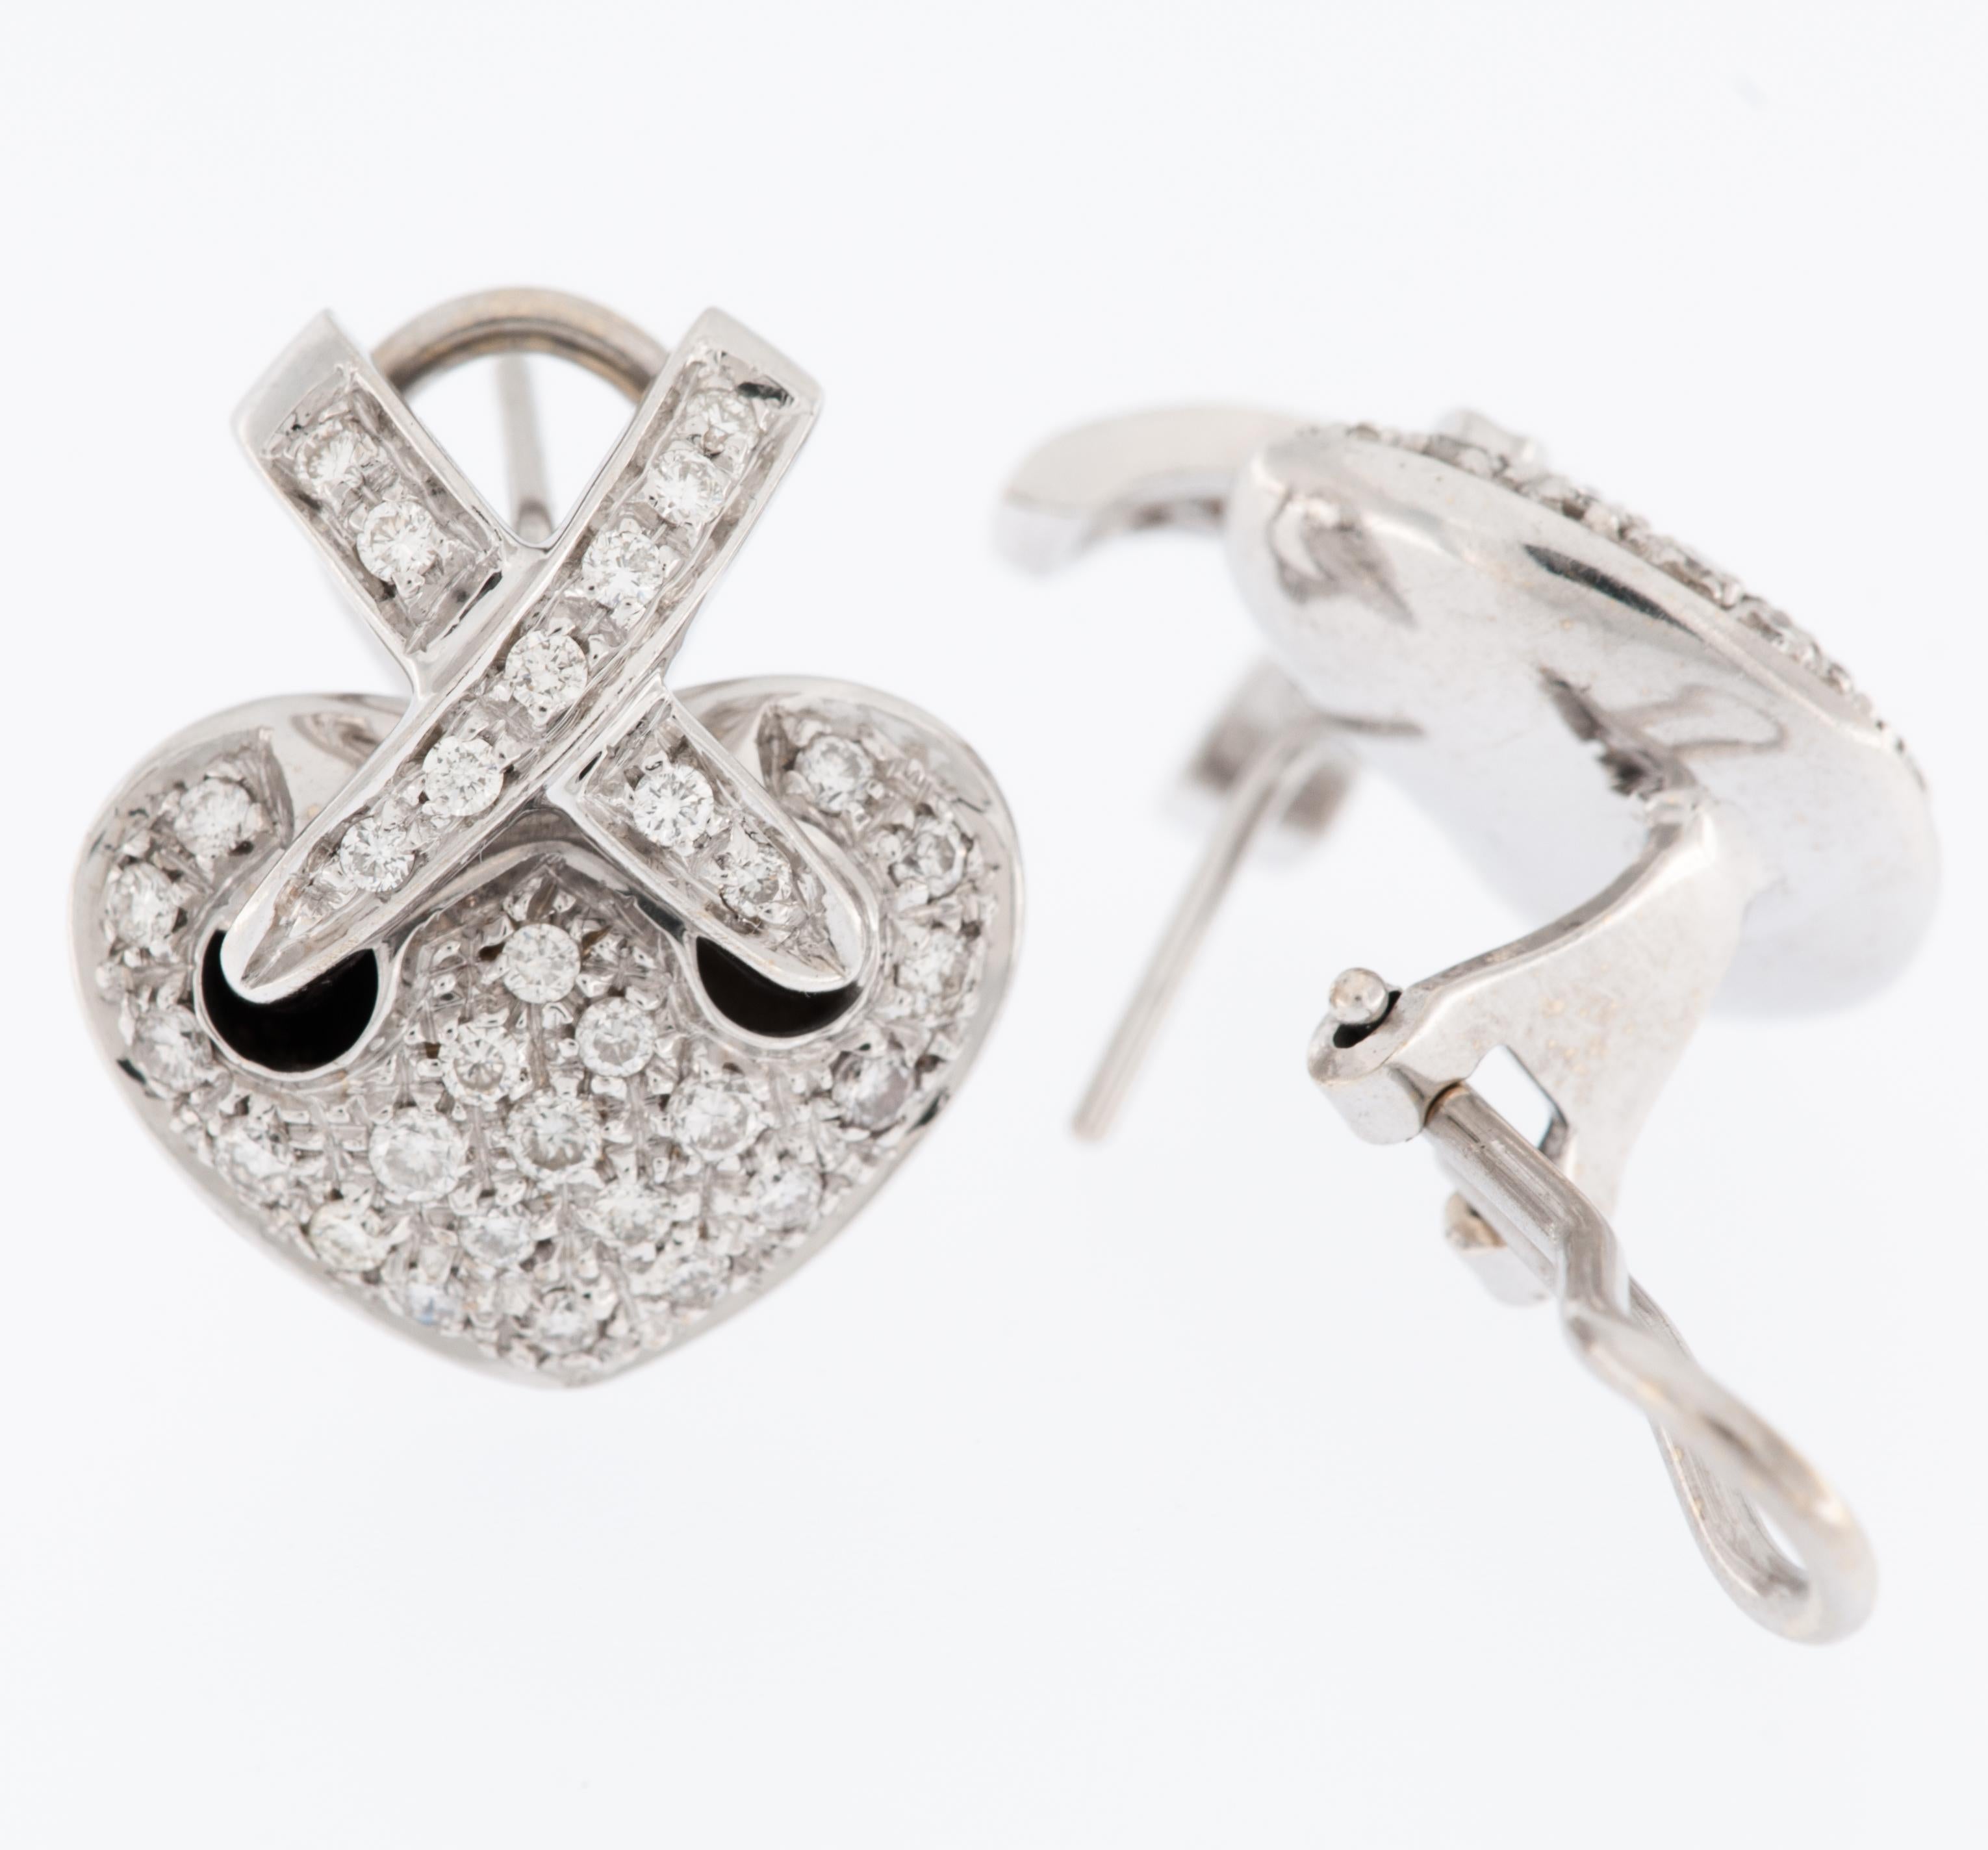 The Chaumet Liens Style 18kt White Gold Heart Earrings with Diamonds are a stunning example of fine jewelry that combines elegance with a touch of romance.

The earrings are made from 18-karat white gold, a choice that imparts a sense of modern